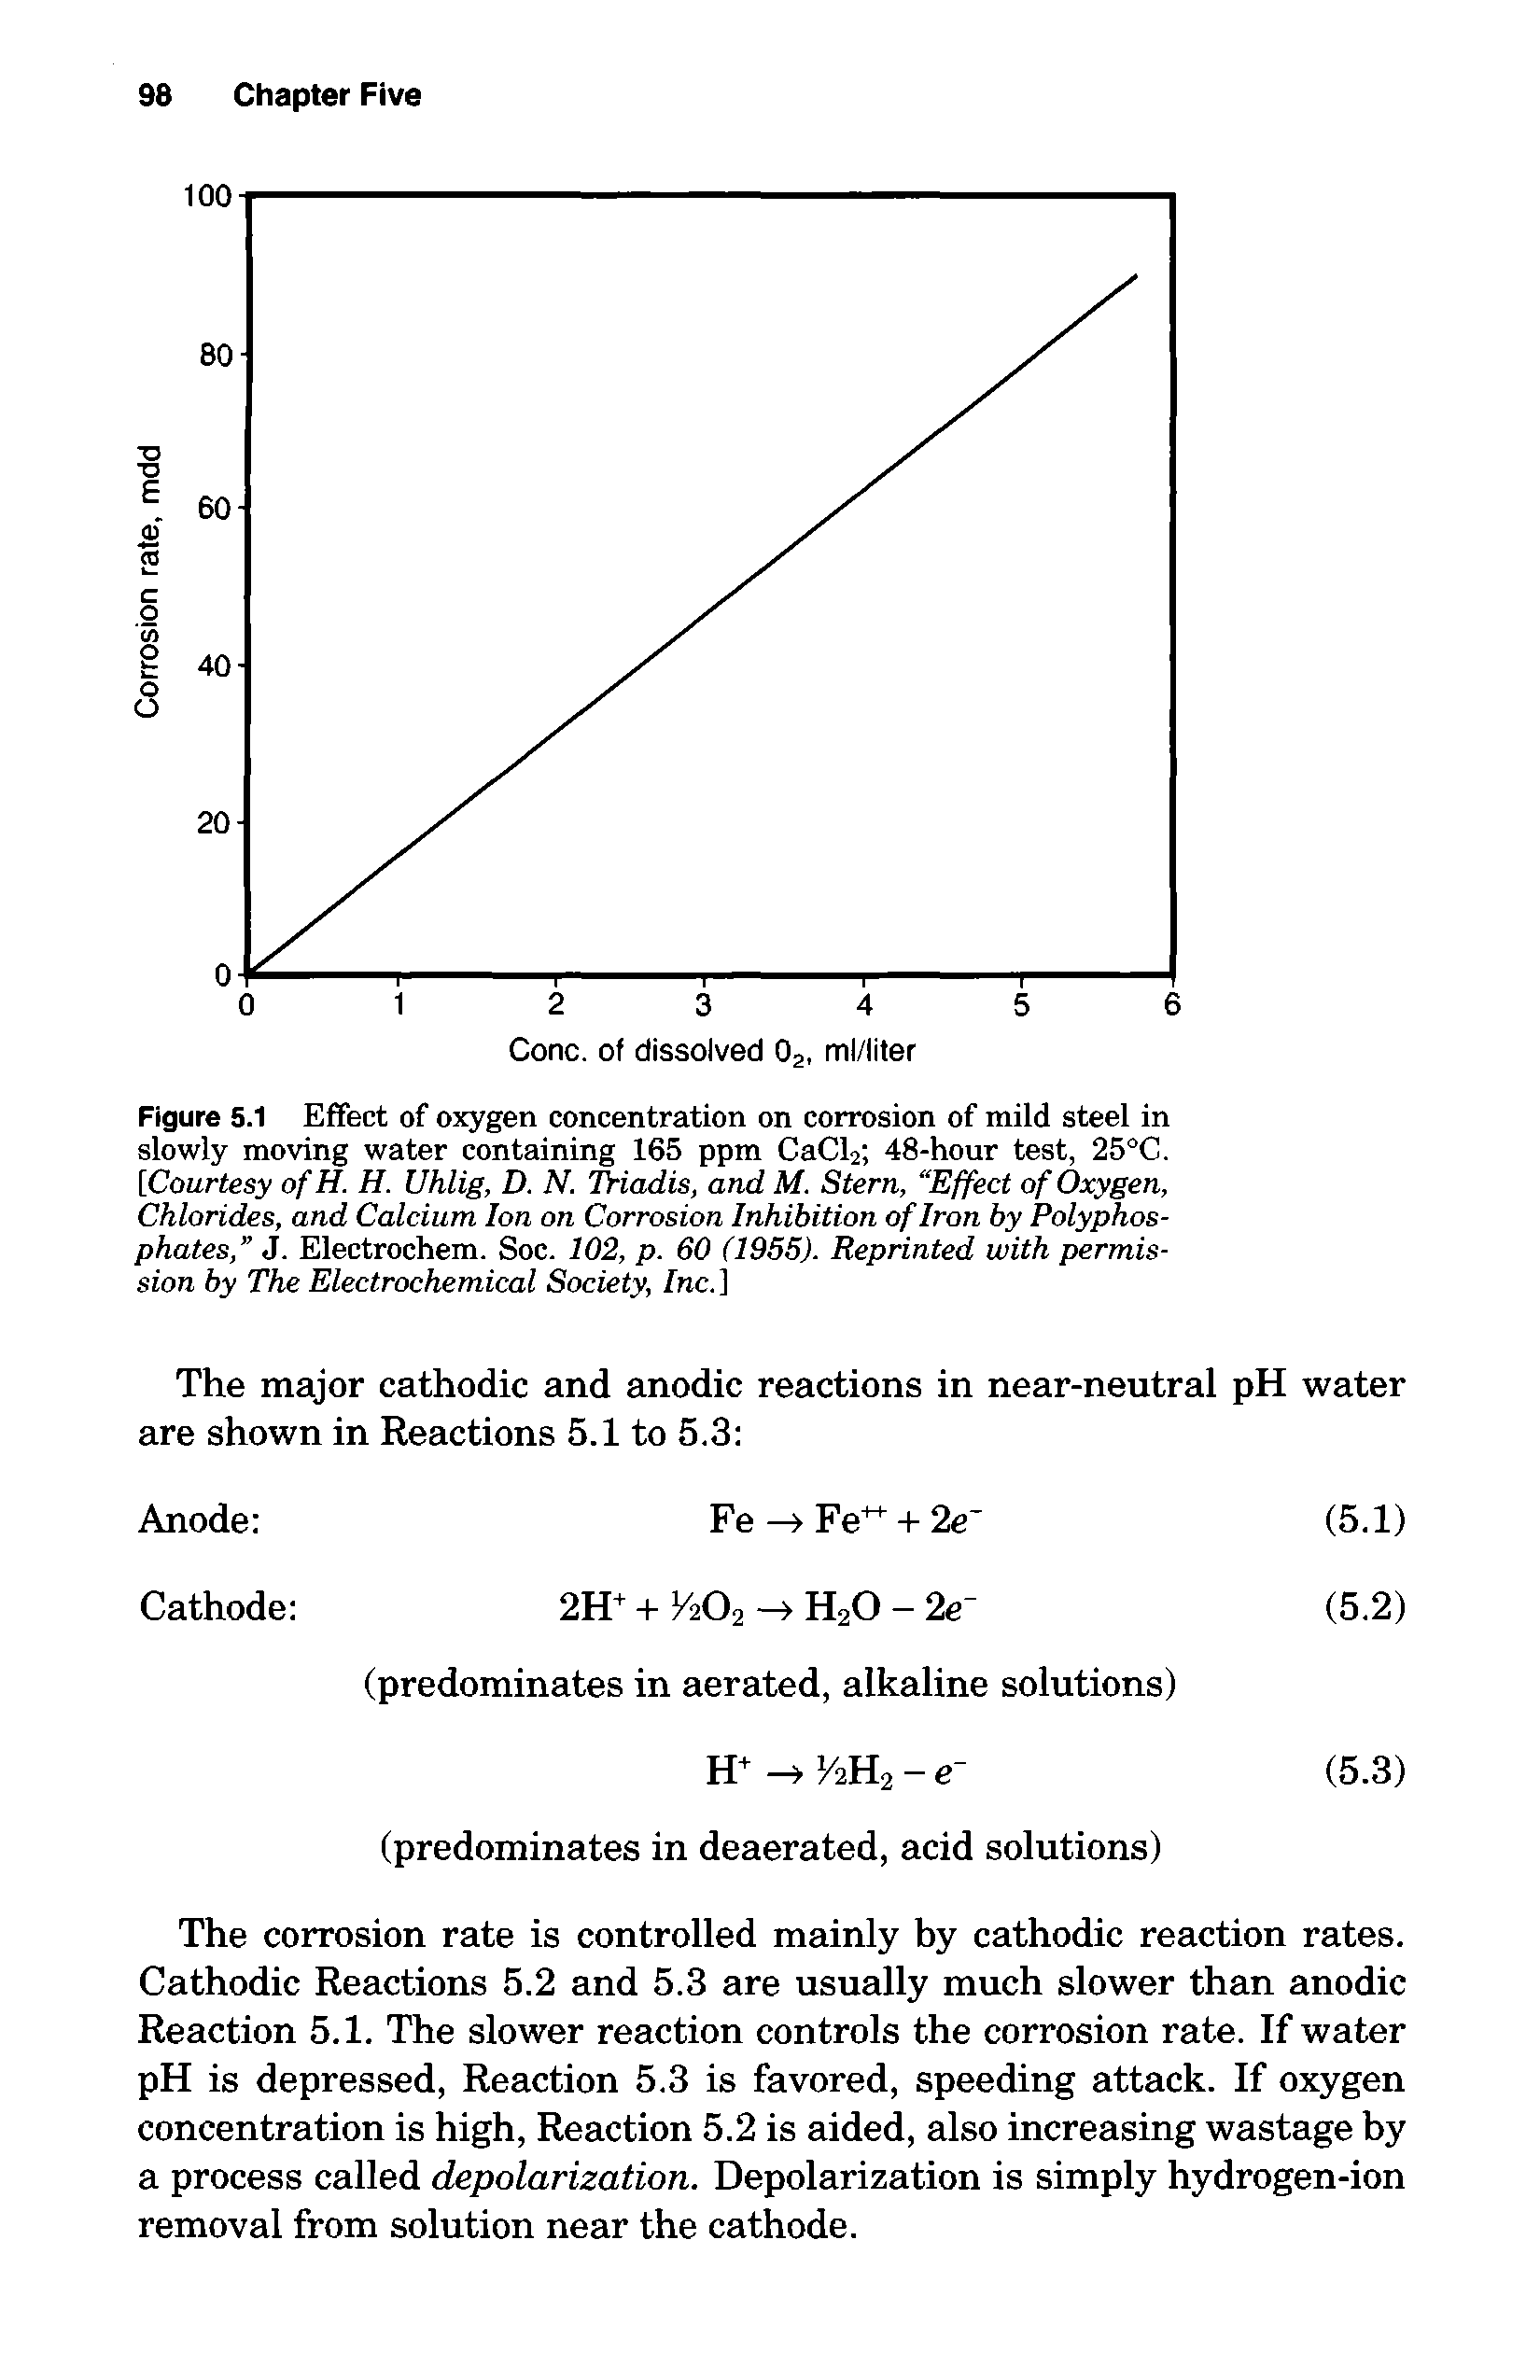 Figure 5.1 Effect of oxygen concentration on corrosion of mild steel in slowly moving water containing 165 ppm CaCl2 48-hour test, 25°C. [Courtesy of H. H. Uhlig, D. N. Triadis, and M. Stern, Effect of Oxygen, Chlorides, and Calcium Ion on Corrosion Inhibition of Iron by Polyphosphates, J. Electrochem. Soc. 102, p. 60 (1955). Reprinted with permission by The Electrochemical Society, Inc. ]...